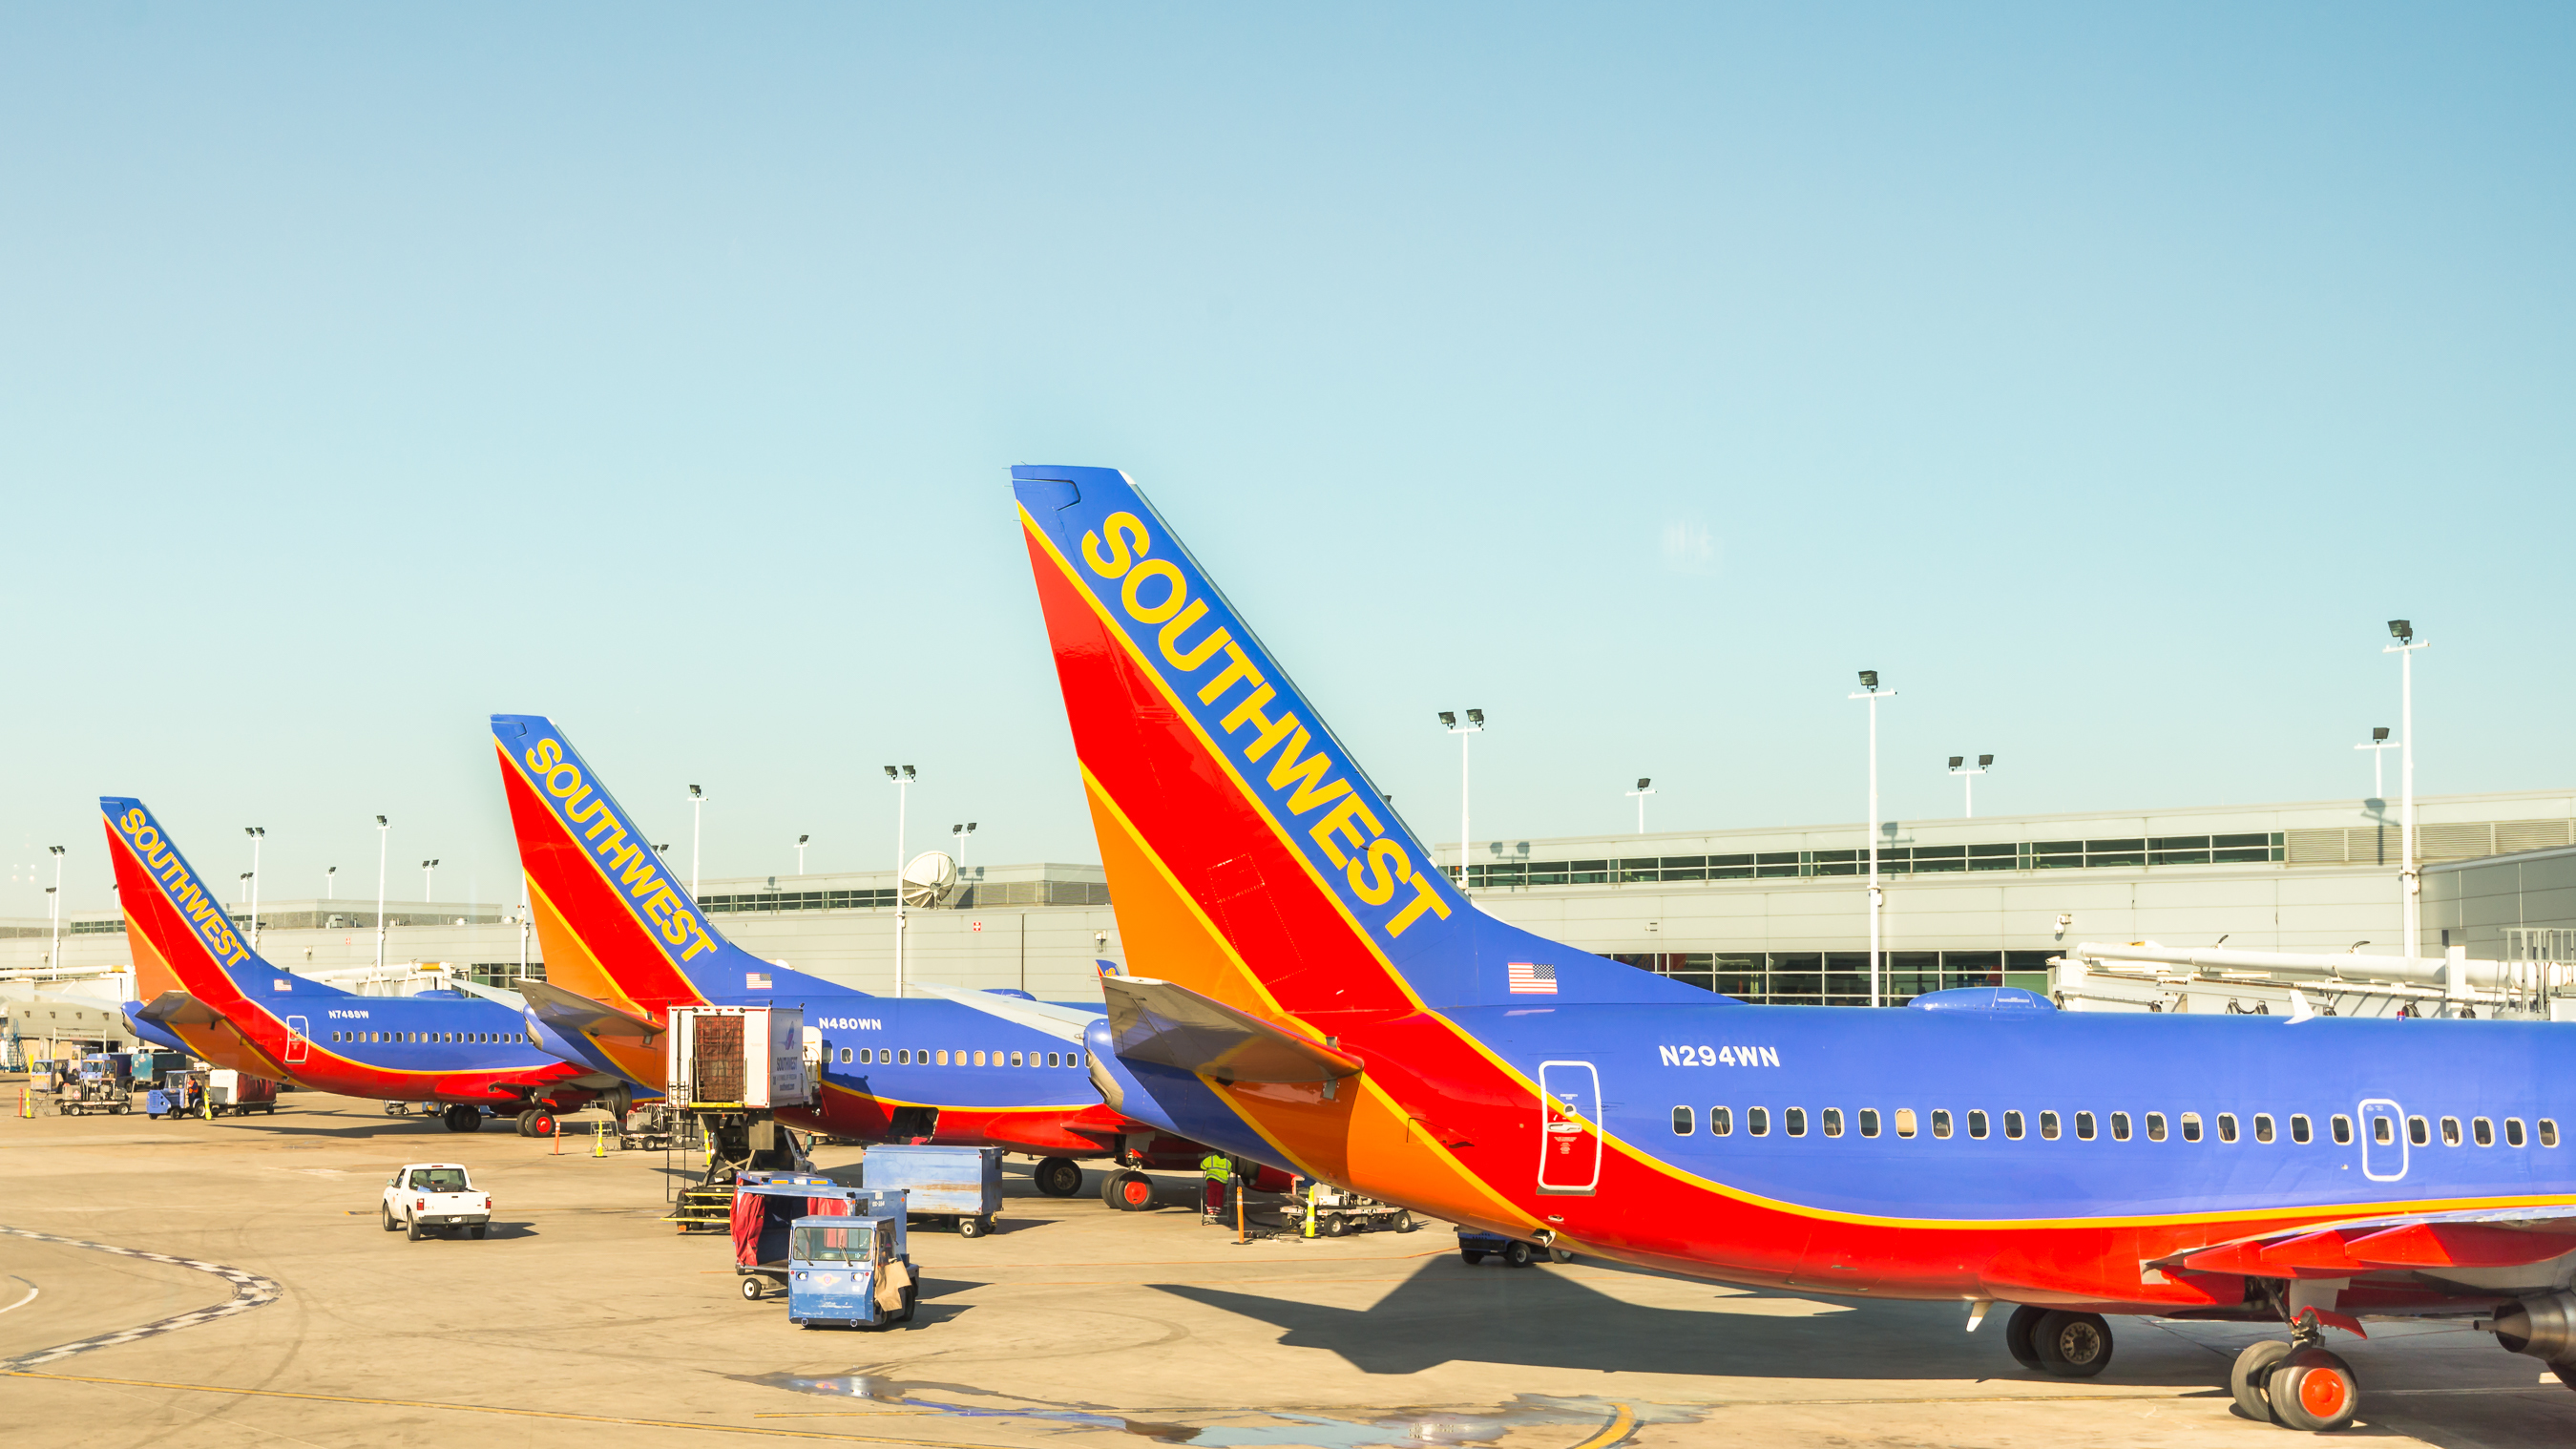 Scrounging For The Southwest Companion Pass Last Minute There Are Still Ways Deals We Like